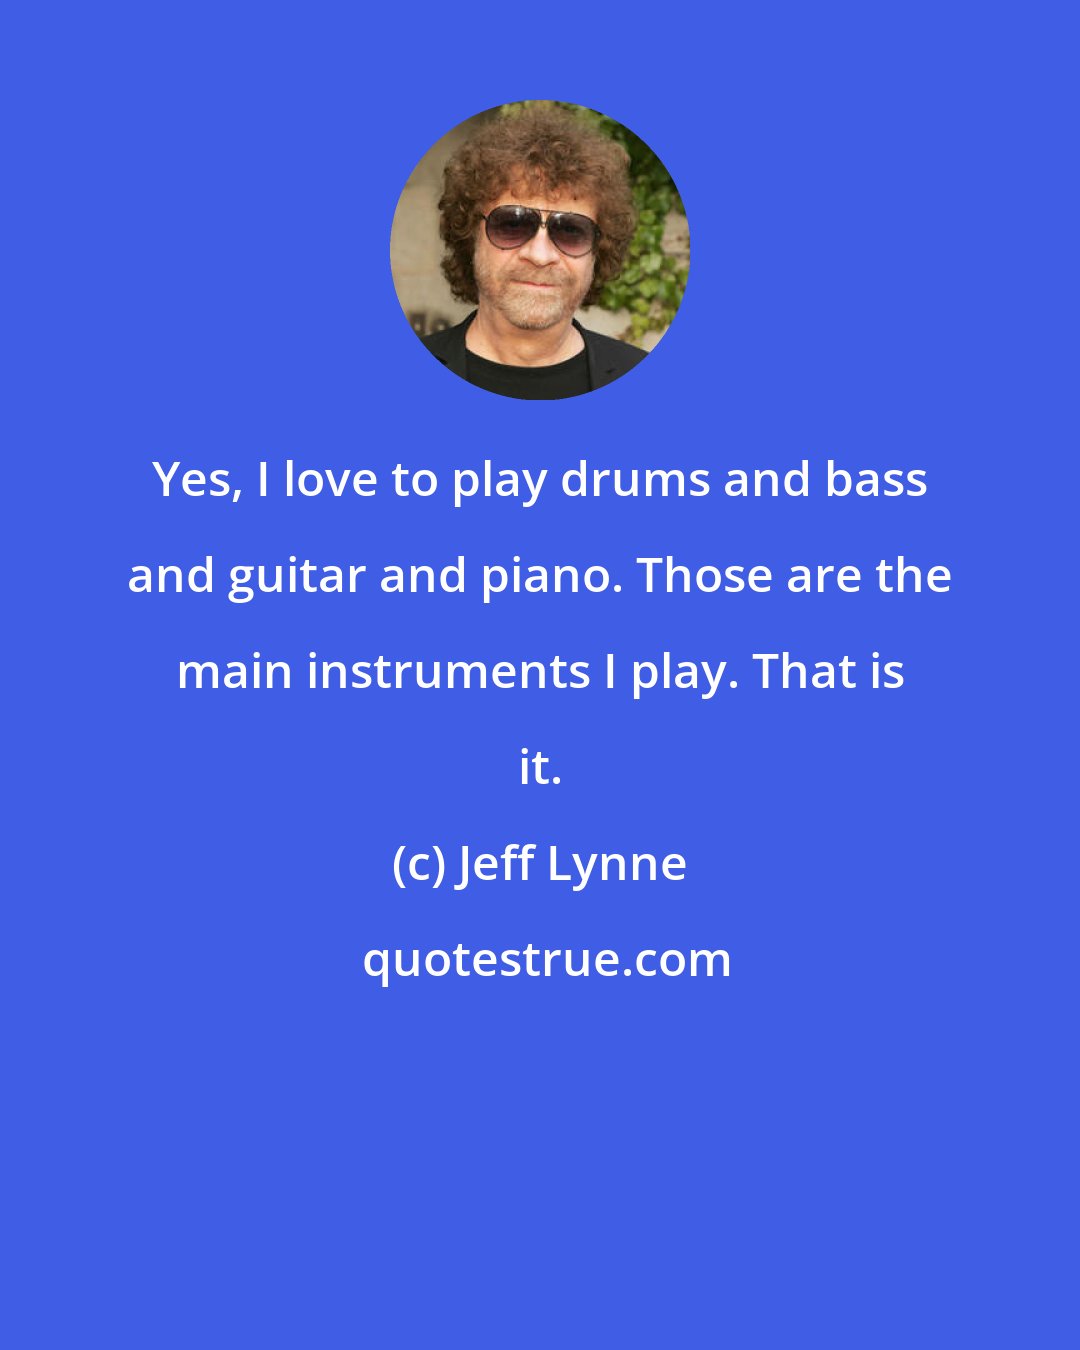 Jeff Lynne: Yes, I love to play drums and bass and guitar and piano. Those are the main instruments I play. That is it.